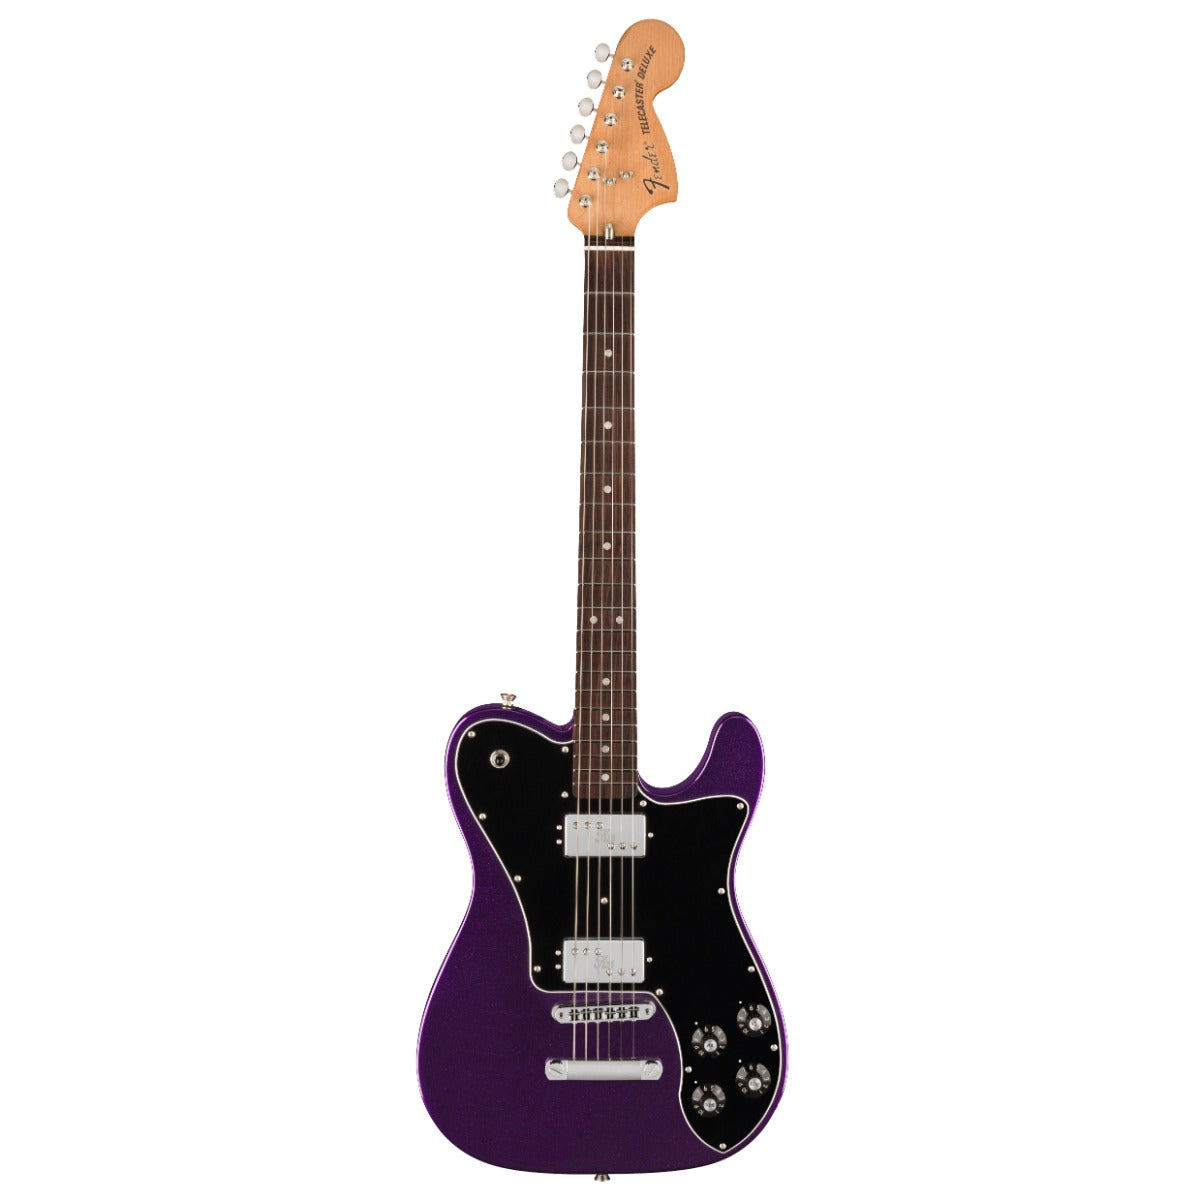 Fender Kingfish Telecaster Deluxe - Mississippi Night, View 2